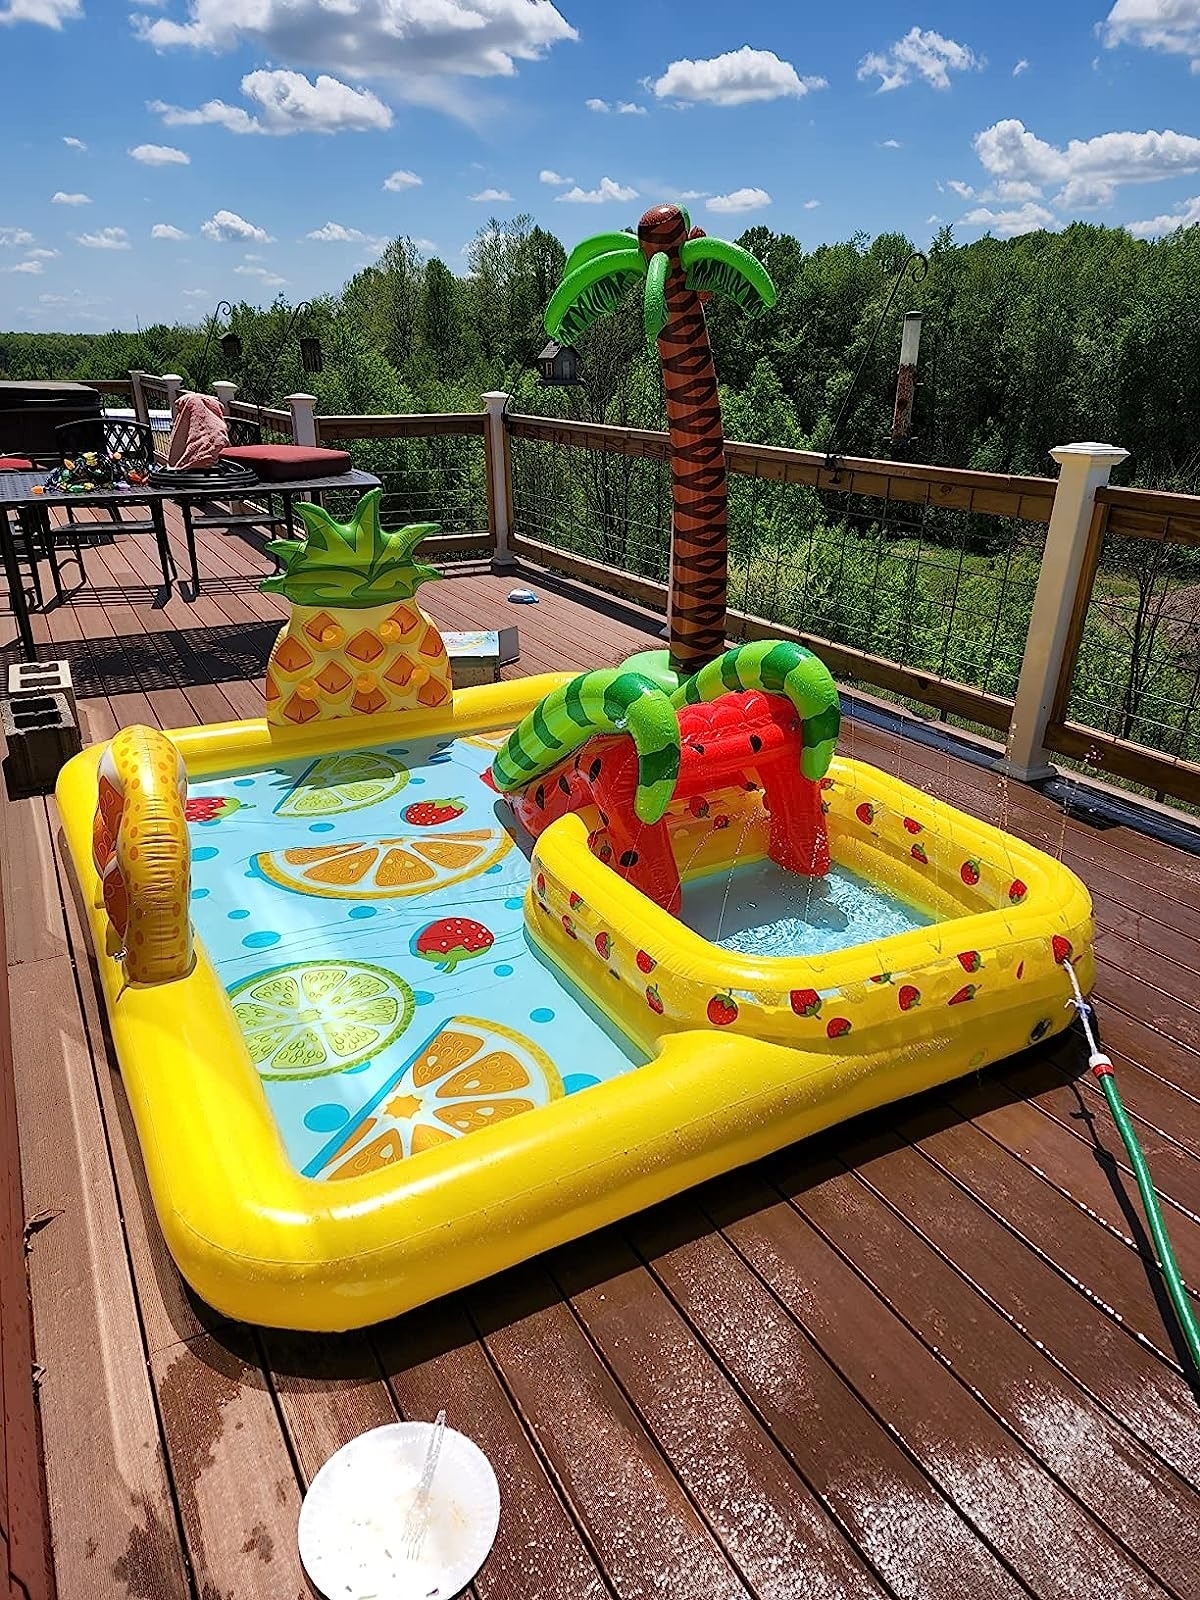 Inflatable pool on a deck